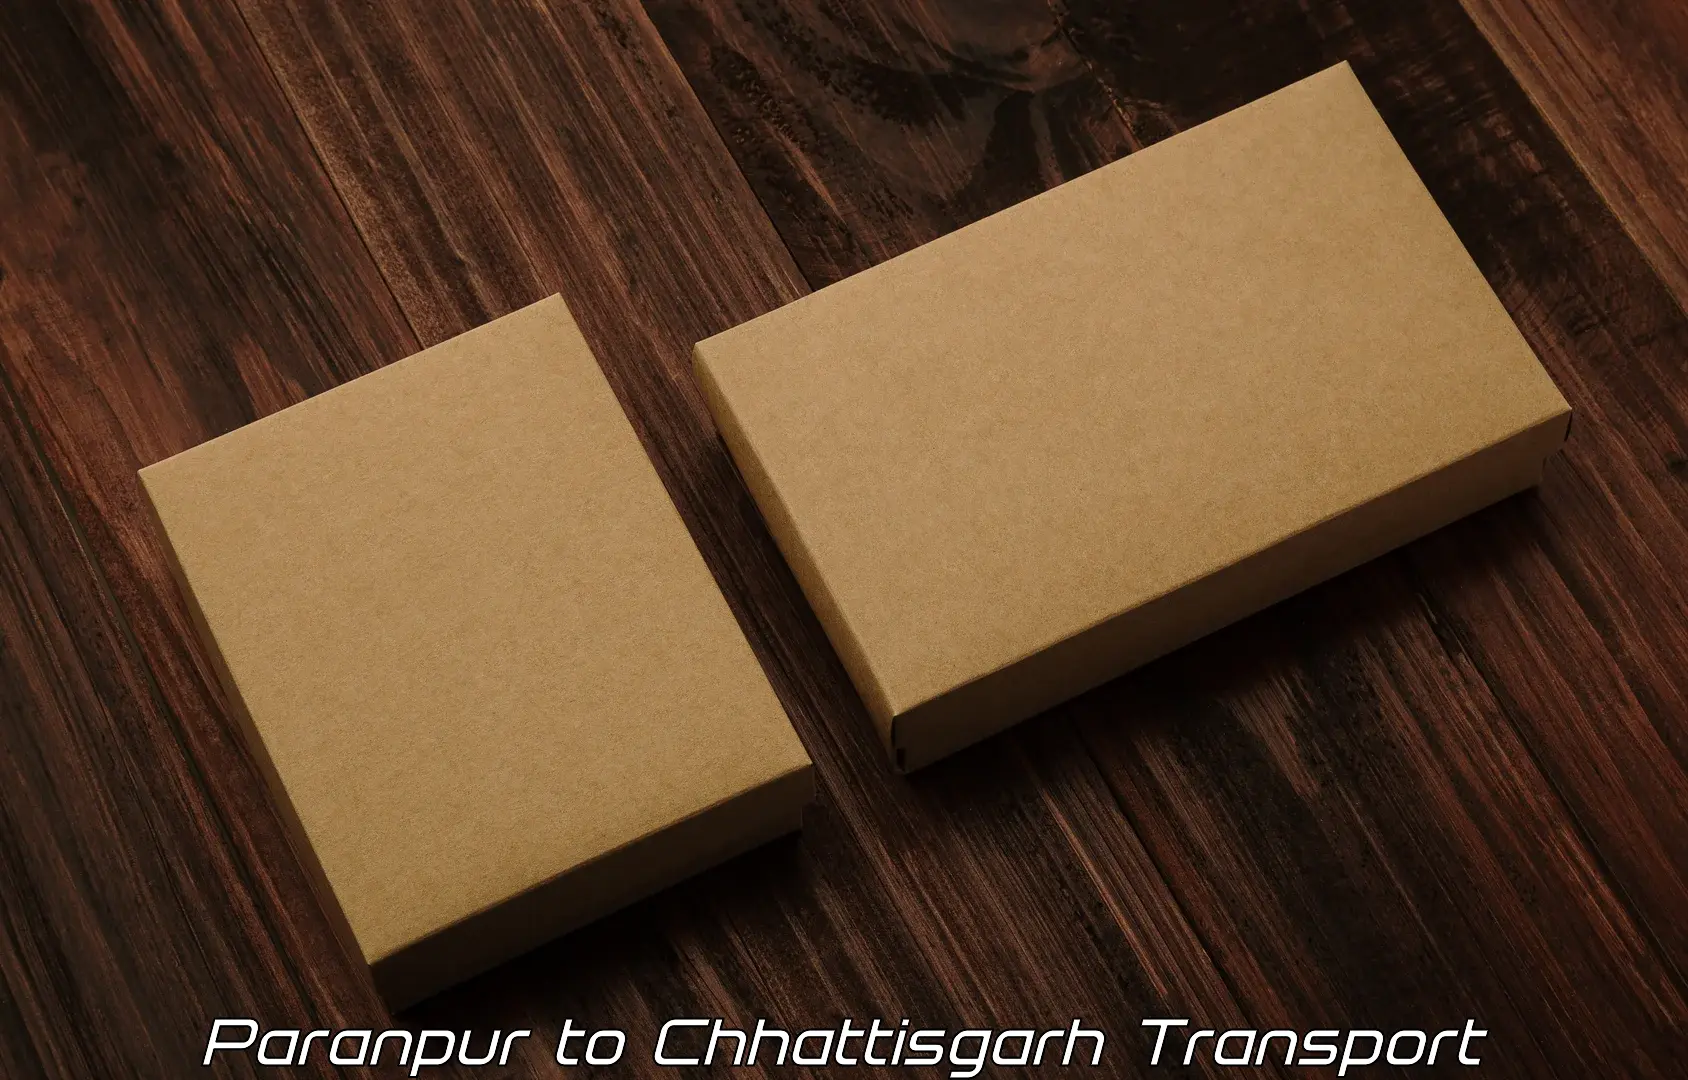 Luggage transport services Paranpur to Raigarh